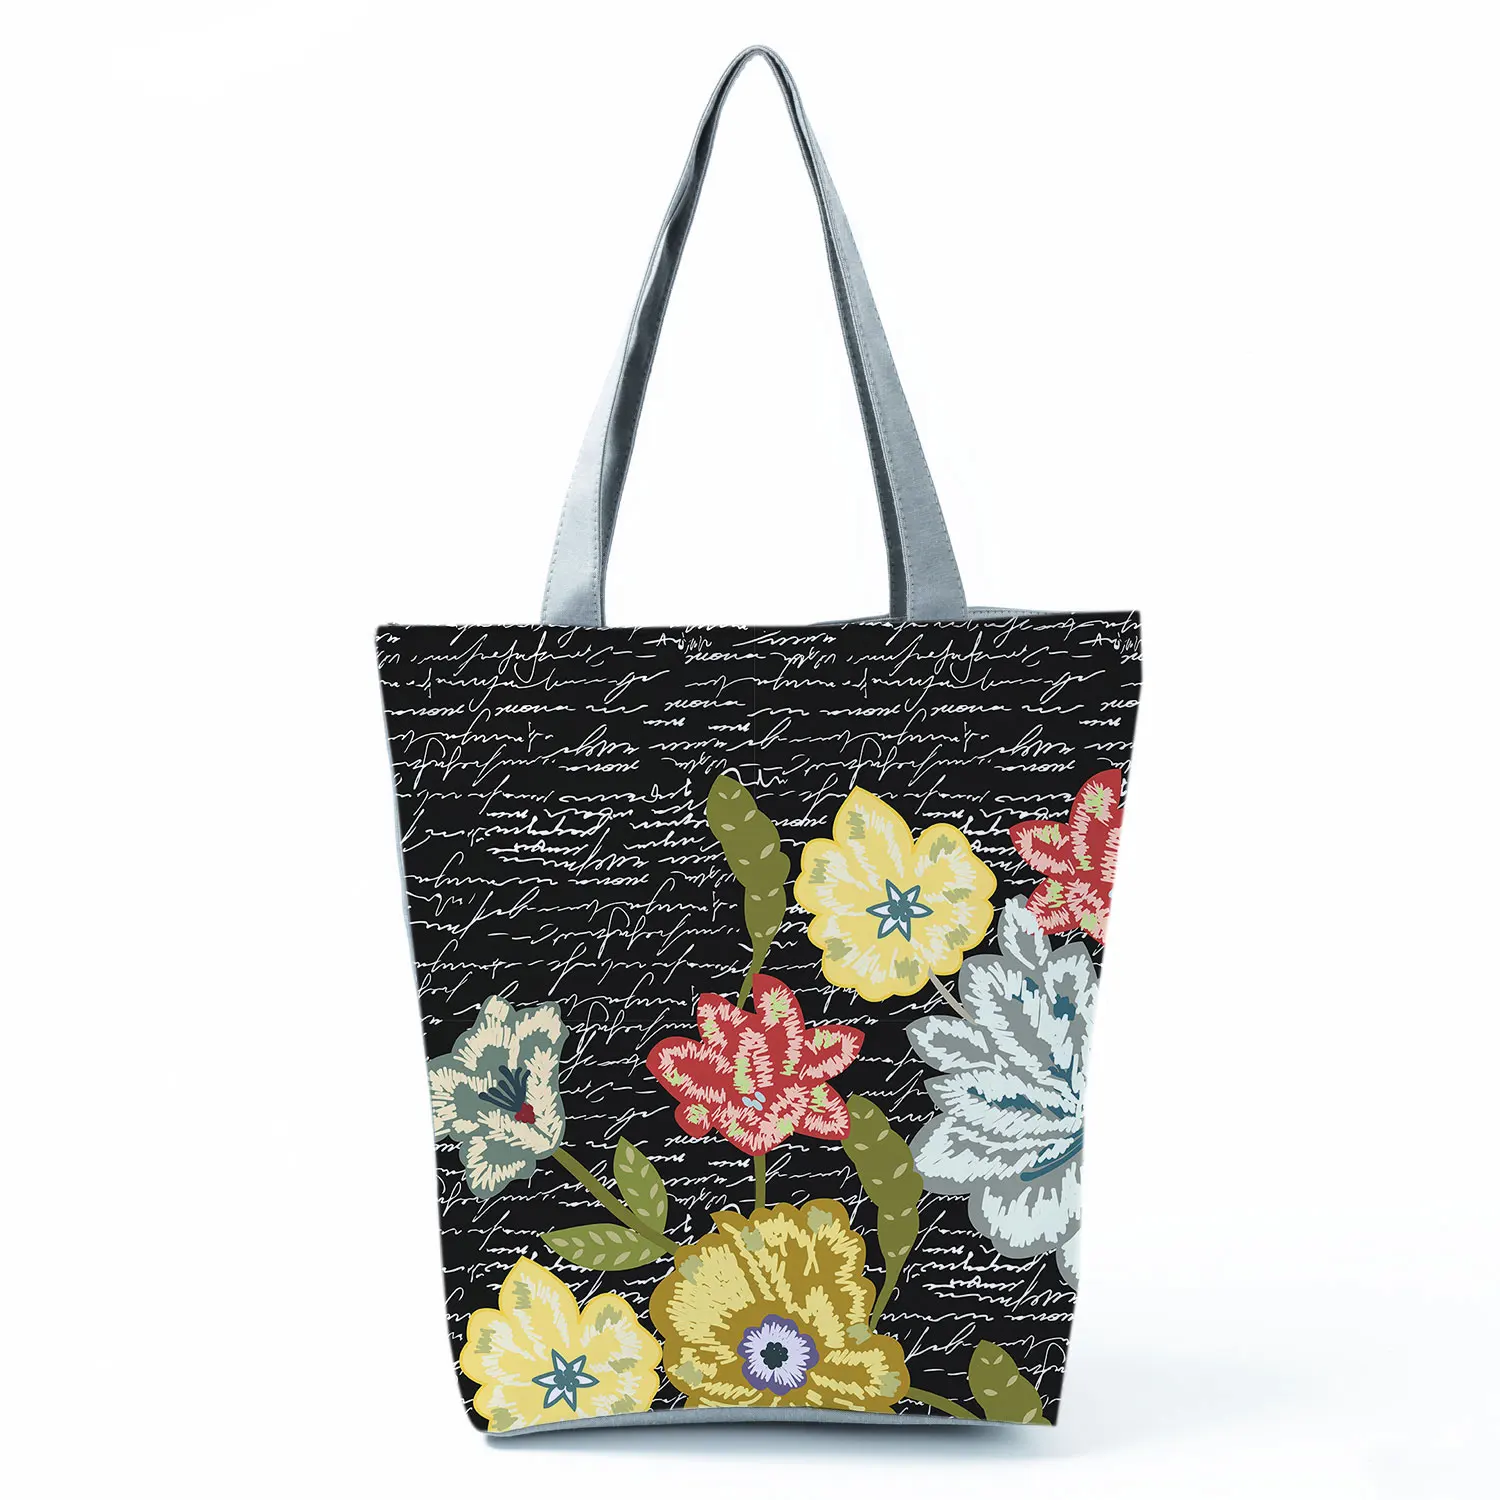 Retro Embroidery Flower Bird Printed Handbags Portable All-match Shoulder Bag Vintage Tote Bag Aesthetic Large Shopper For Wife